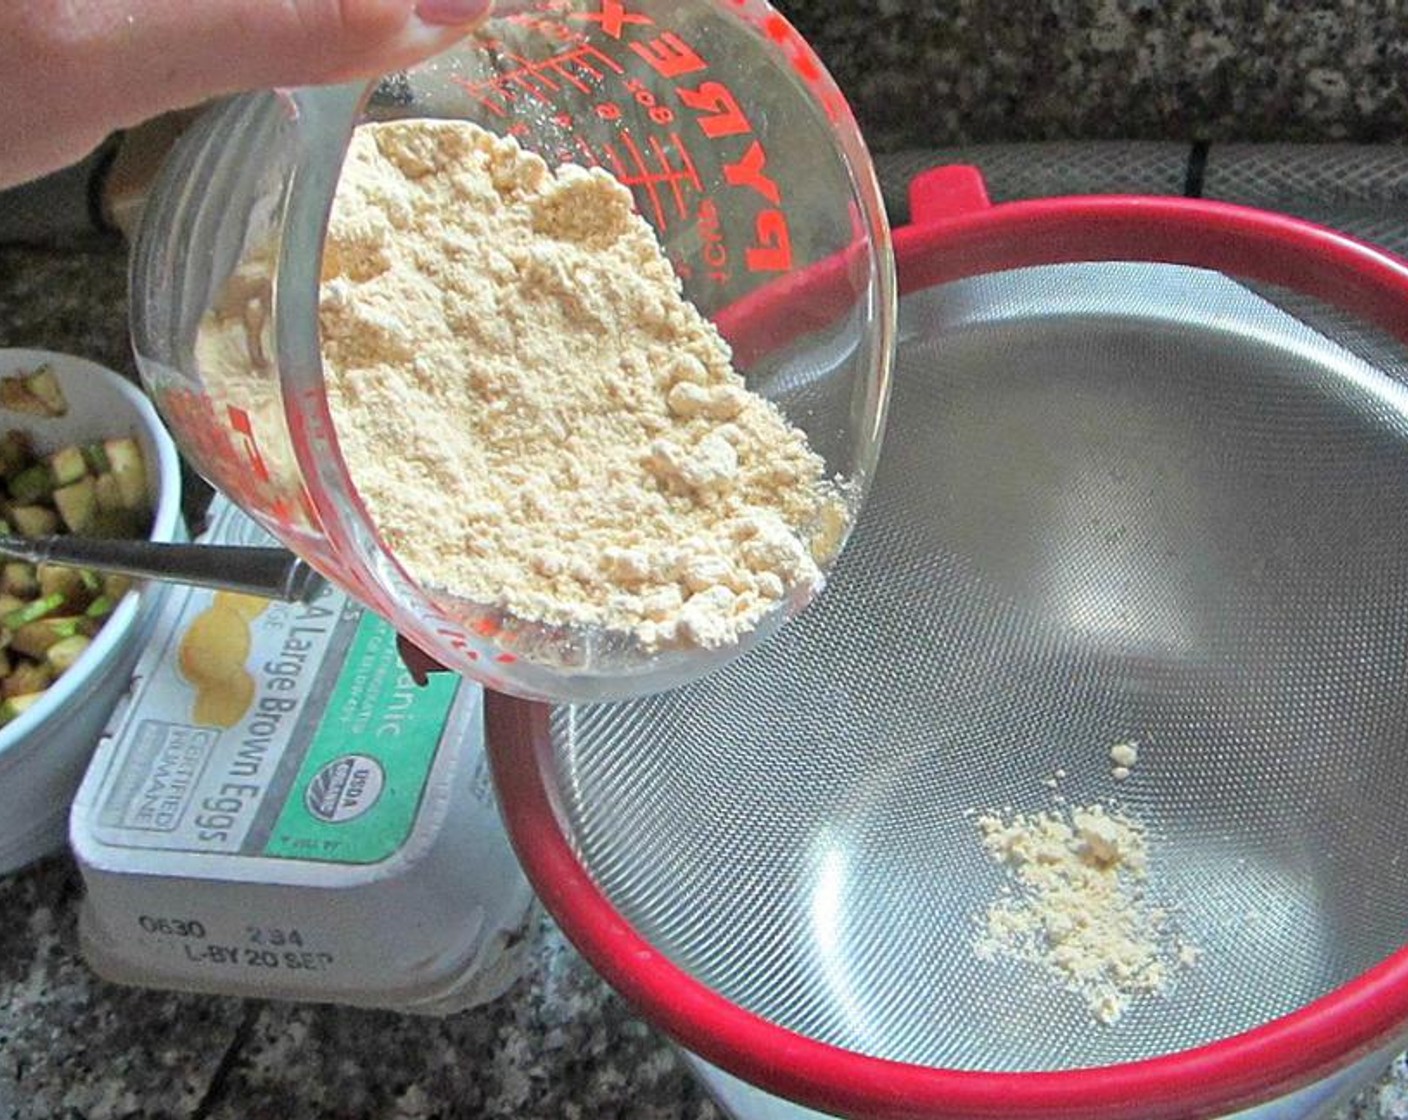 step 6 Pass your Coconut Flour (1/2 cup) through a sieve into a medium bowl. Whisk the coconut flour together with the other dry ingredients, Baking Soda (1 1/4 tsp), Brown Rice Flour (3/4 cup) through Salt (to taste), until dry ingredients are mixed well.